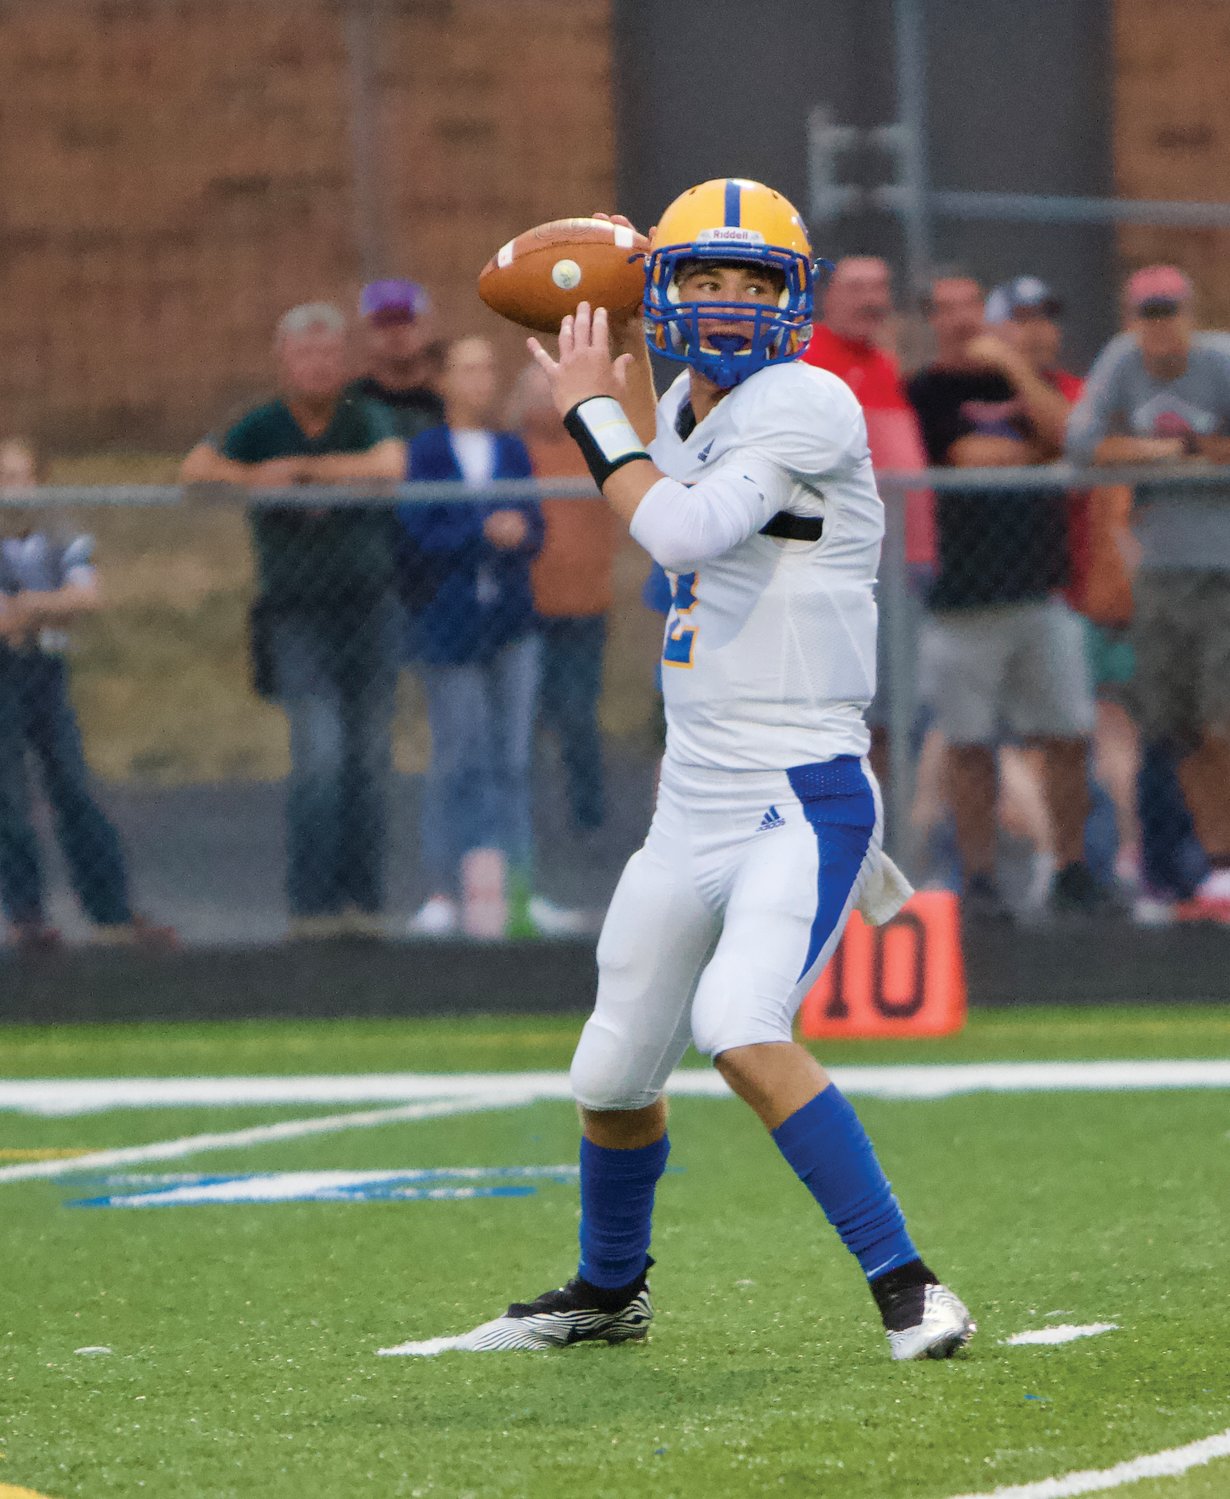 Crawfordsville's Kaiden Underwood fires a pass against Western Boone on Friday night.